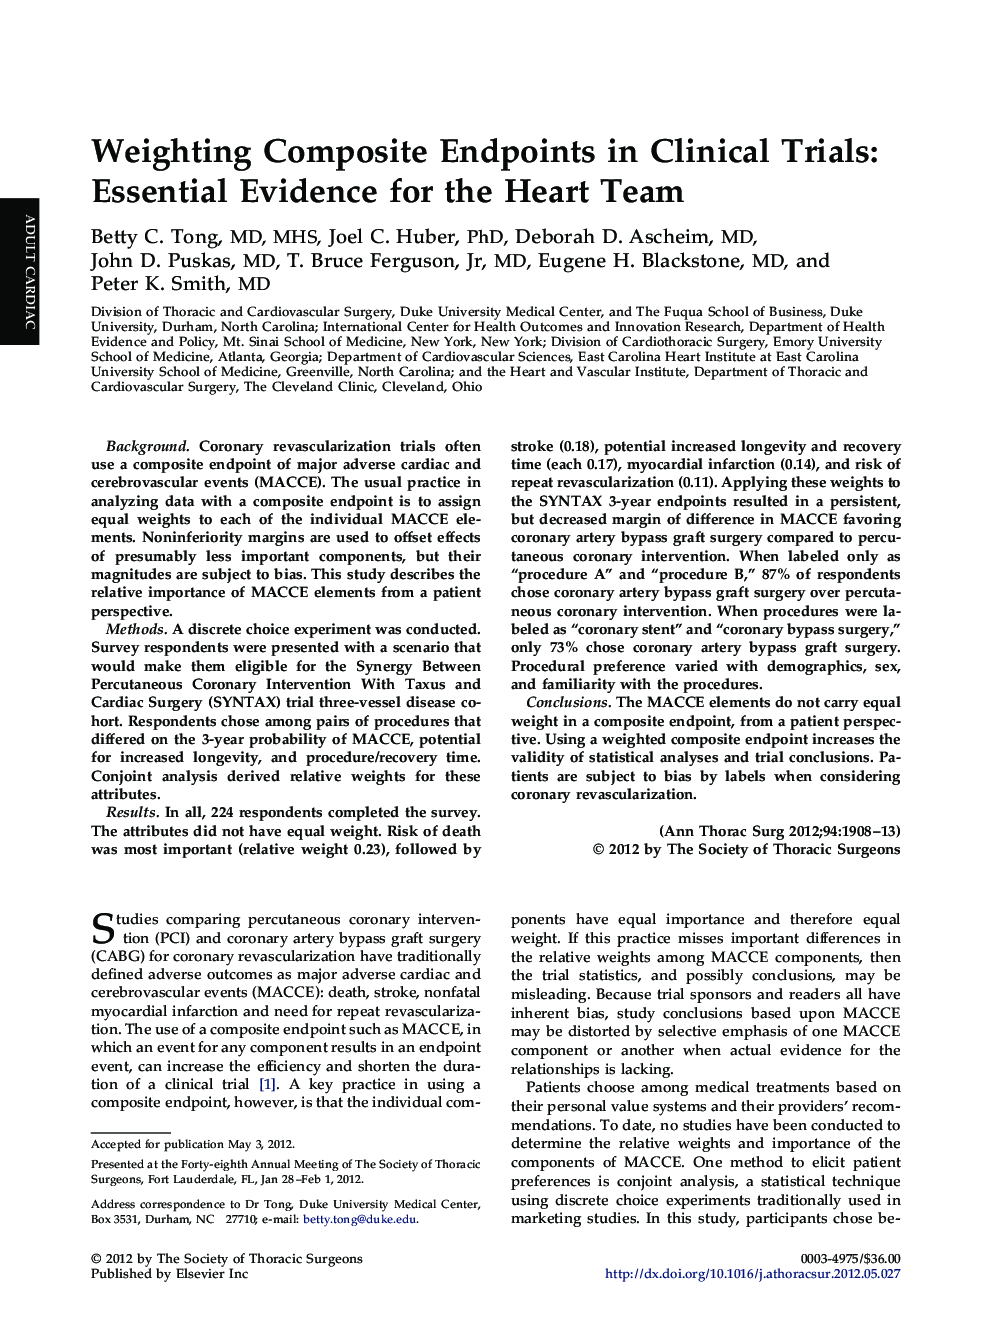 Weighting Composite Endpoints in Clinical Trials: Essential Evidence for the Heart Team